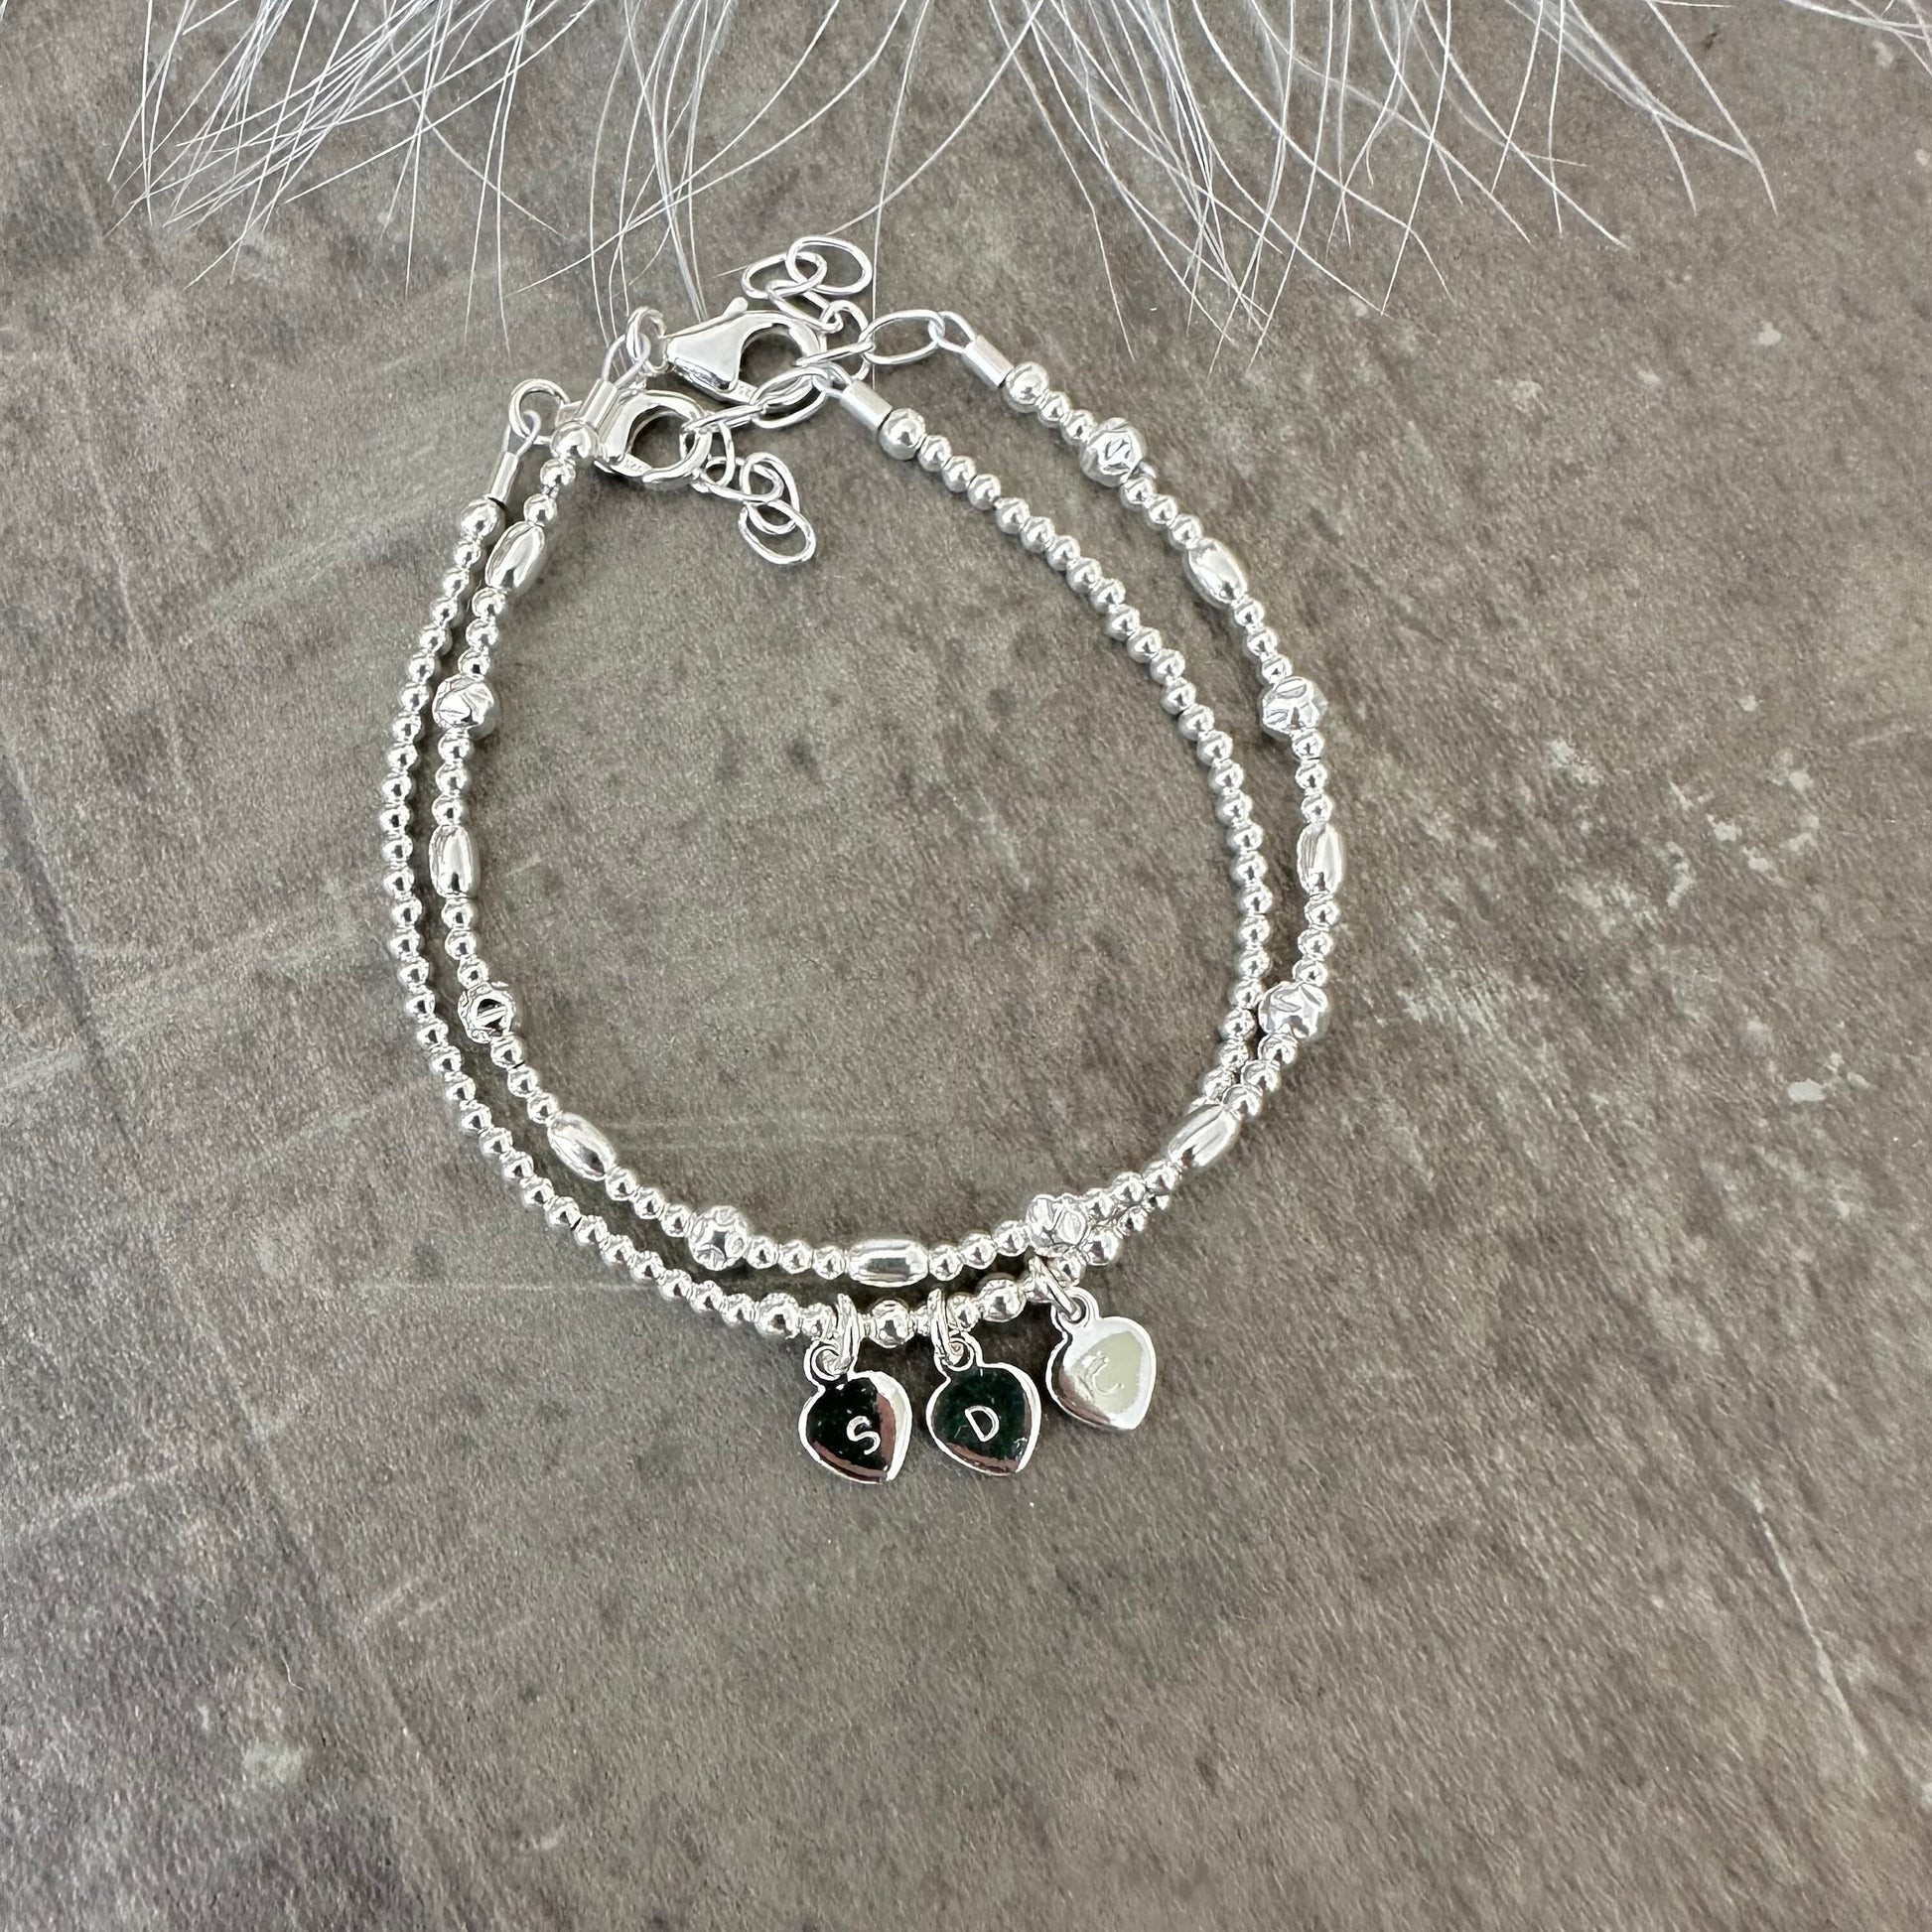 Dainty Personalised Bracelet Set with Family Initials in Sterling Silver